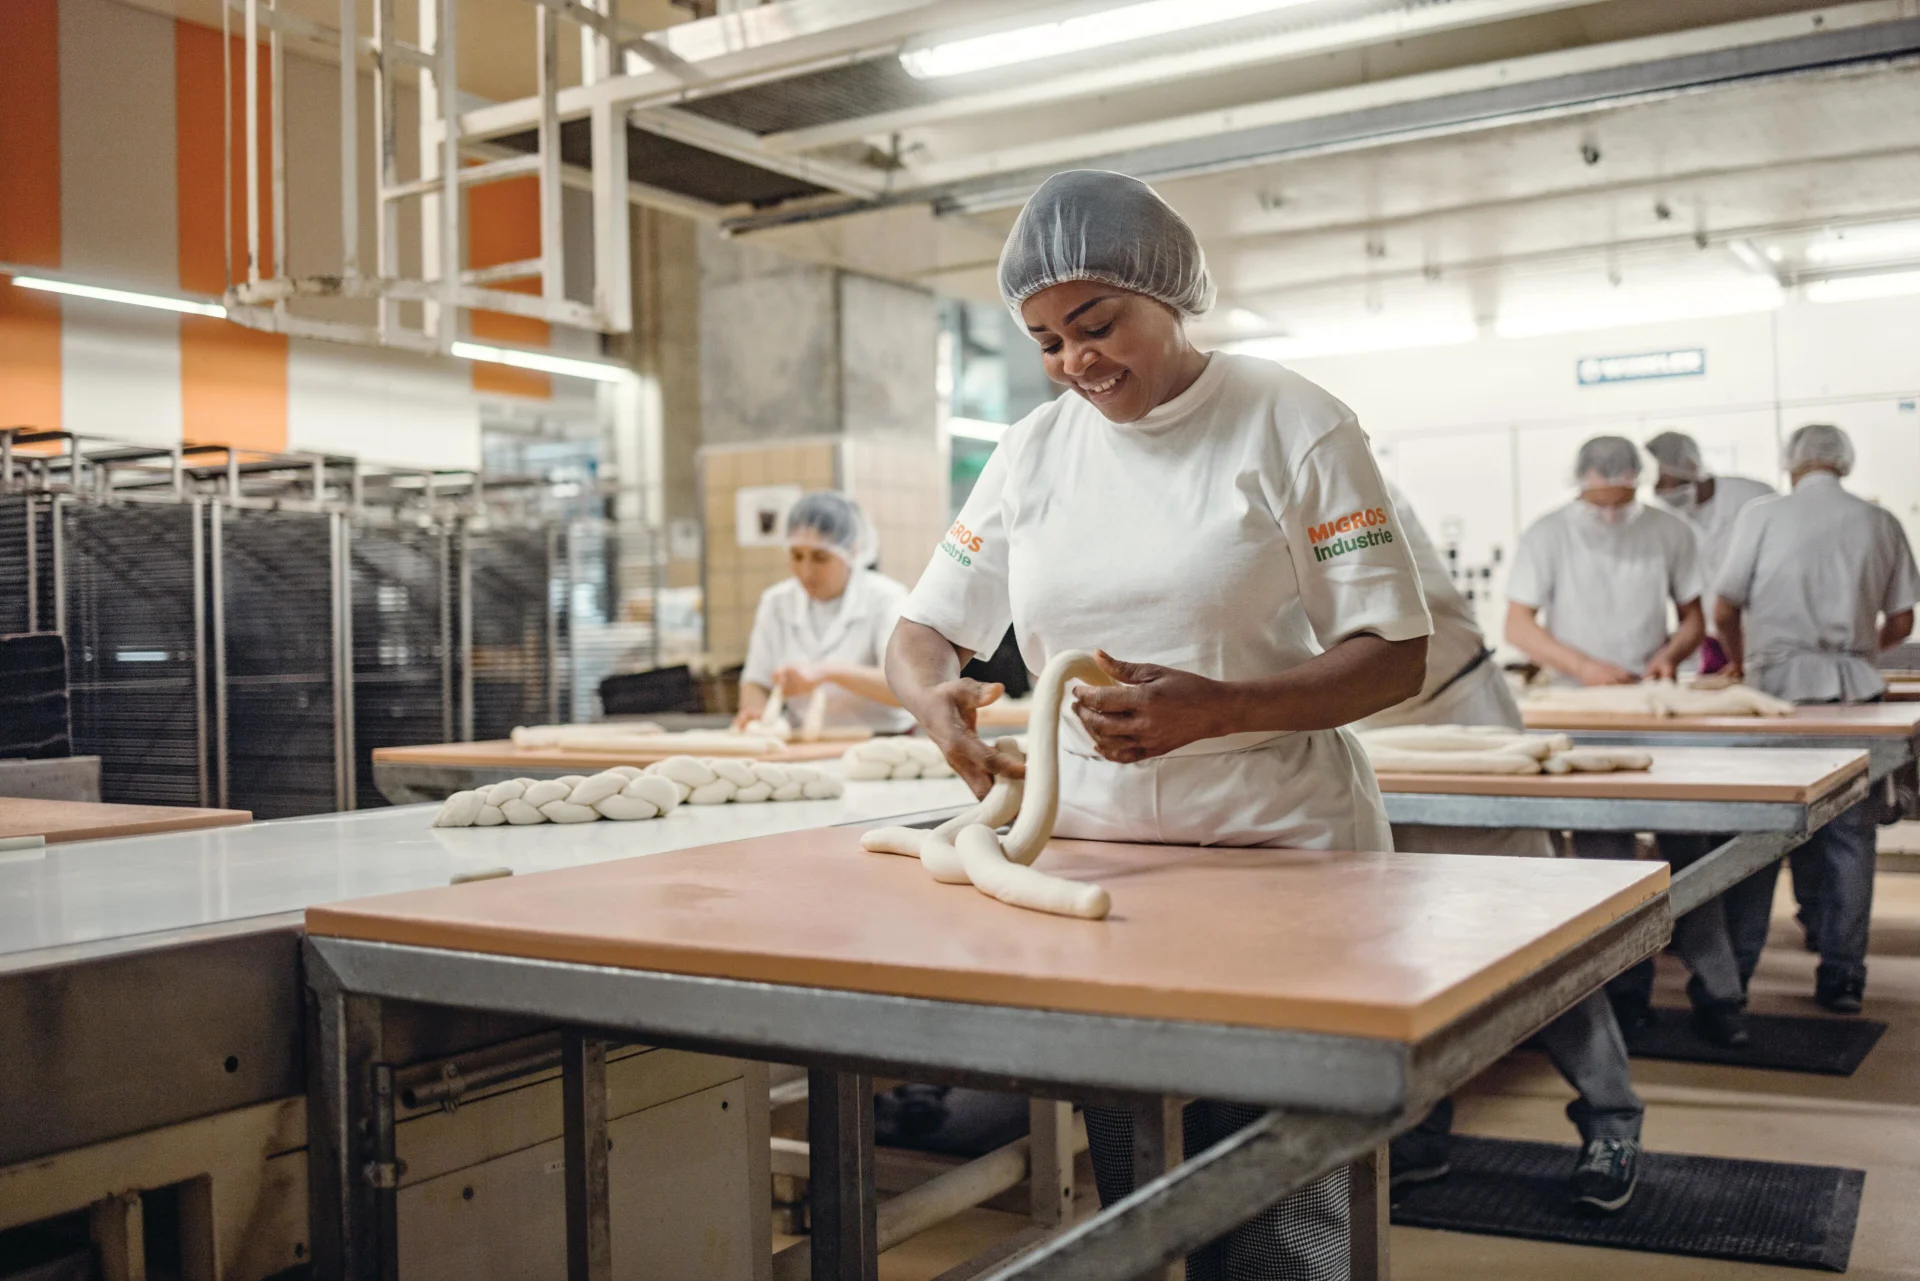 An employee in the bakery forms a braid